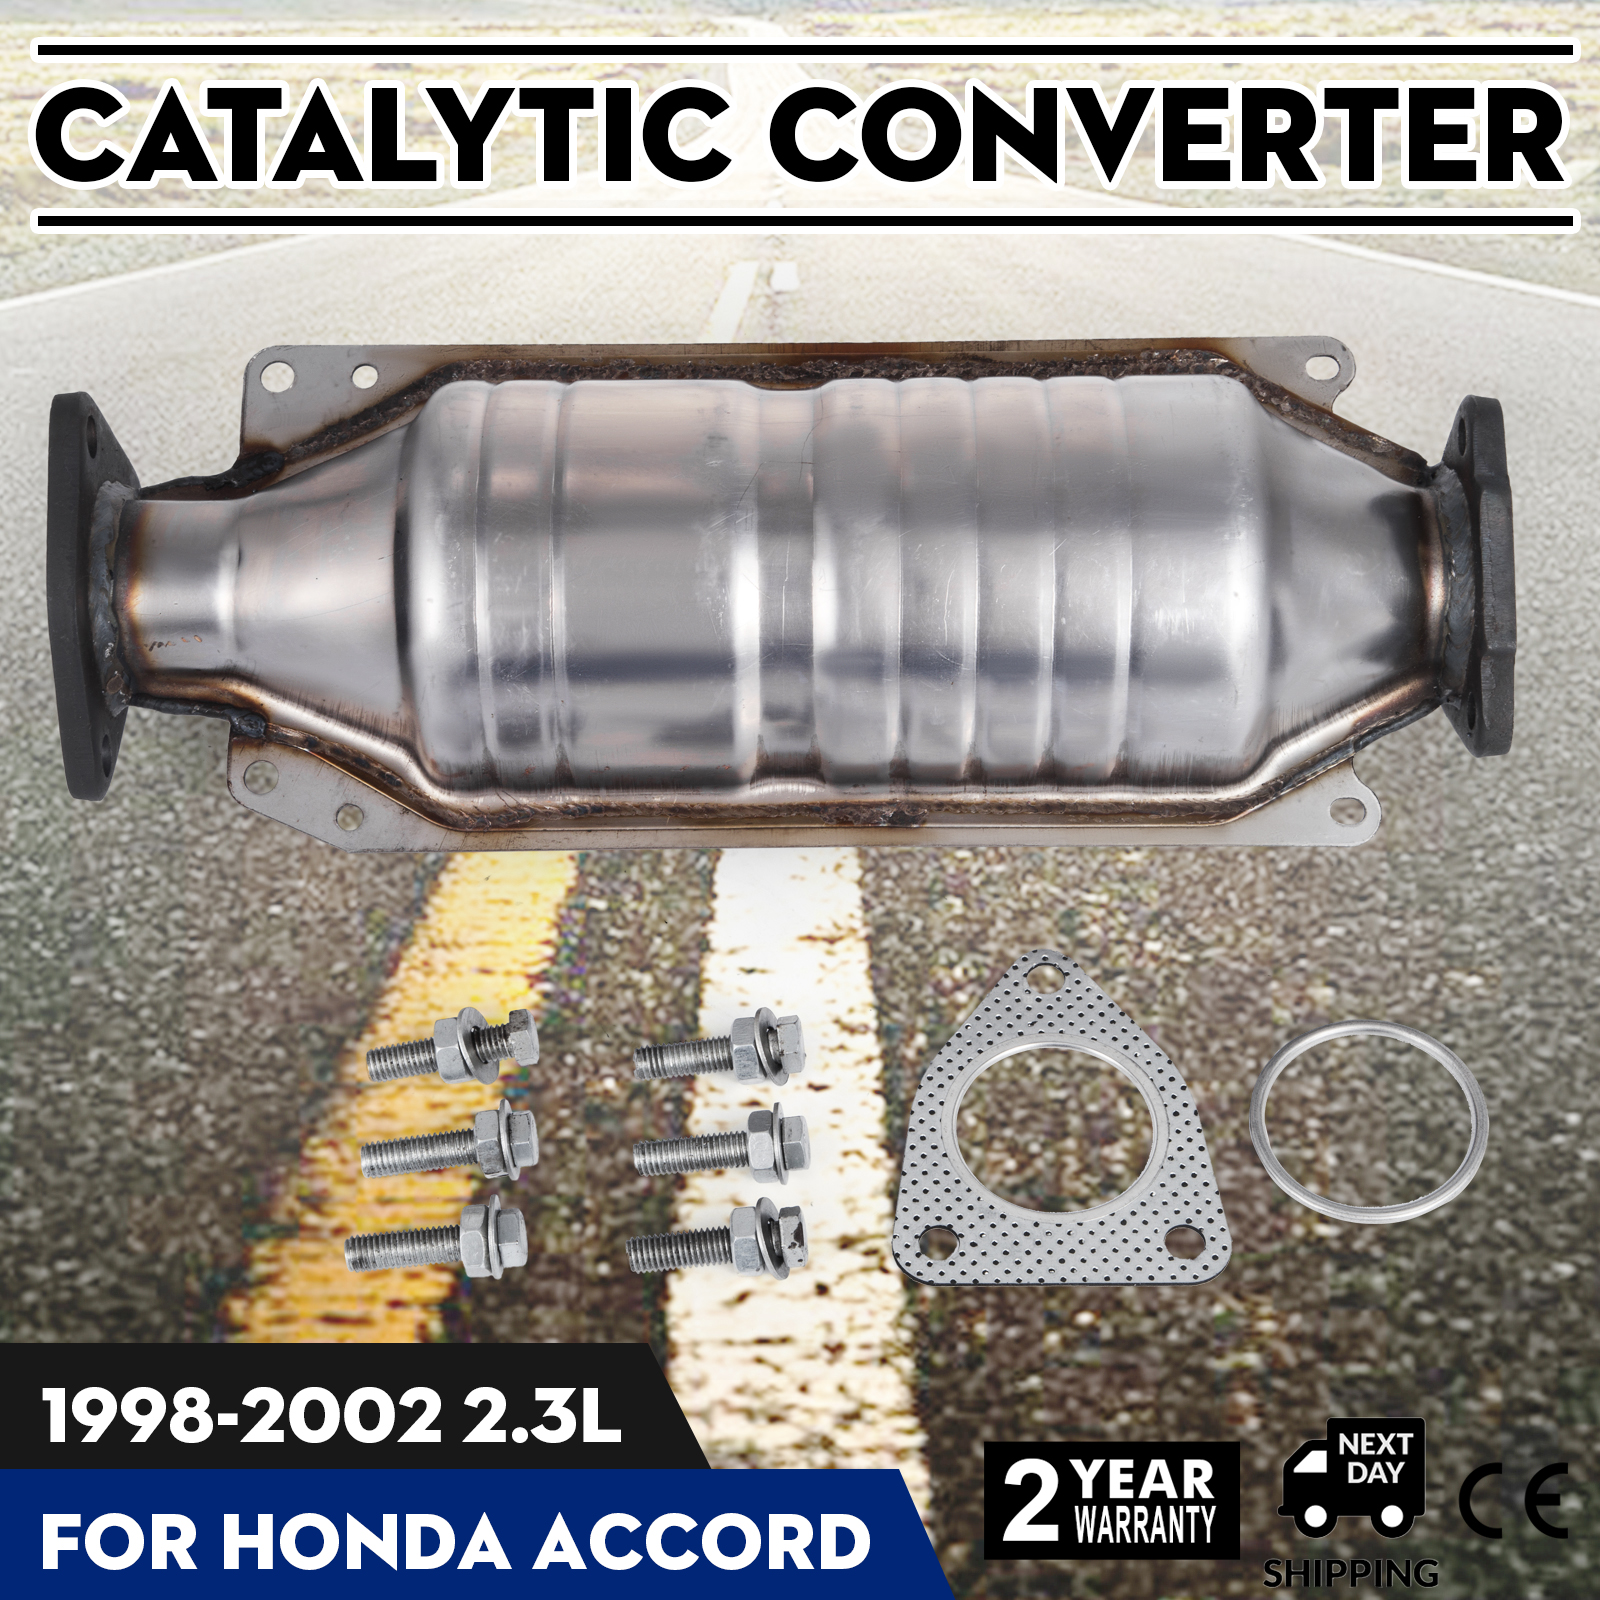 Catalytic Converter for 1998 to 2002 Honda Accord LX EX 2.3L 4 Cylinder Engines